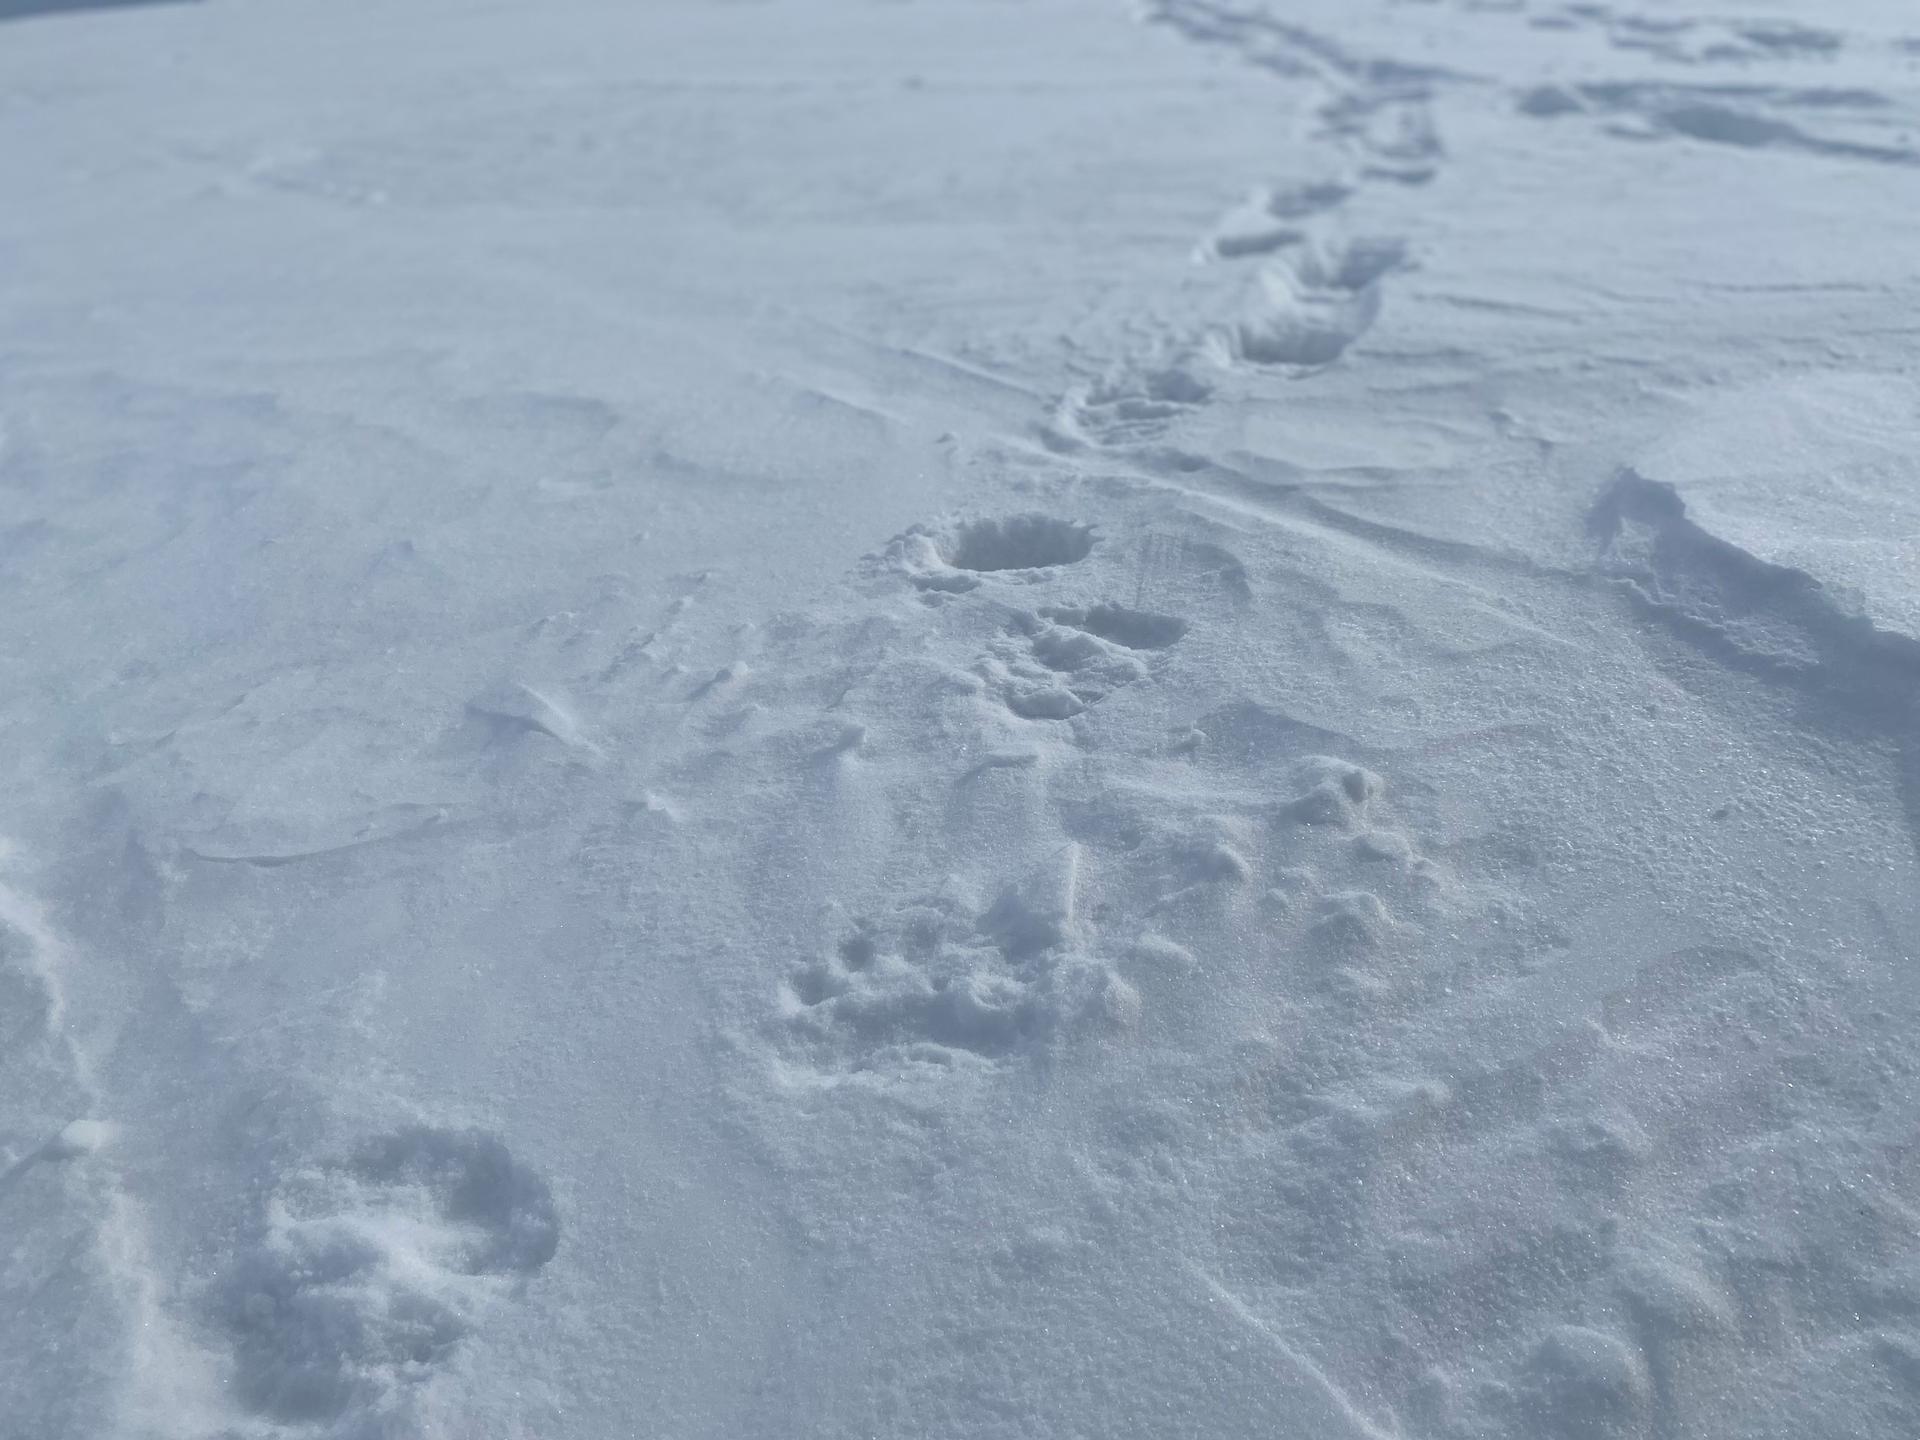 A mother polar bear and two cubs left these tracks as they headed out onto the sea ice. Polar bears range in size just like people, and their paws can be a foot wide.